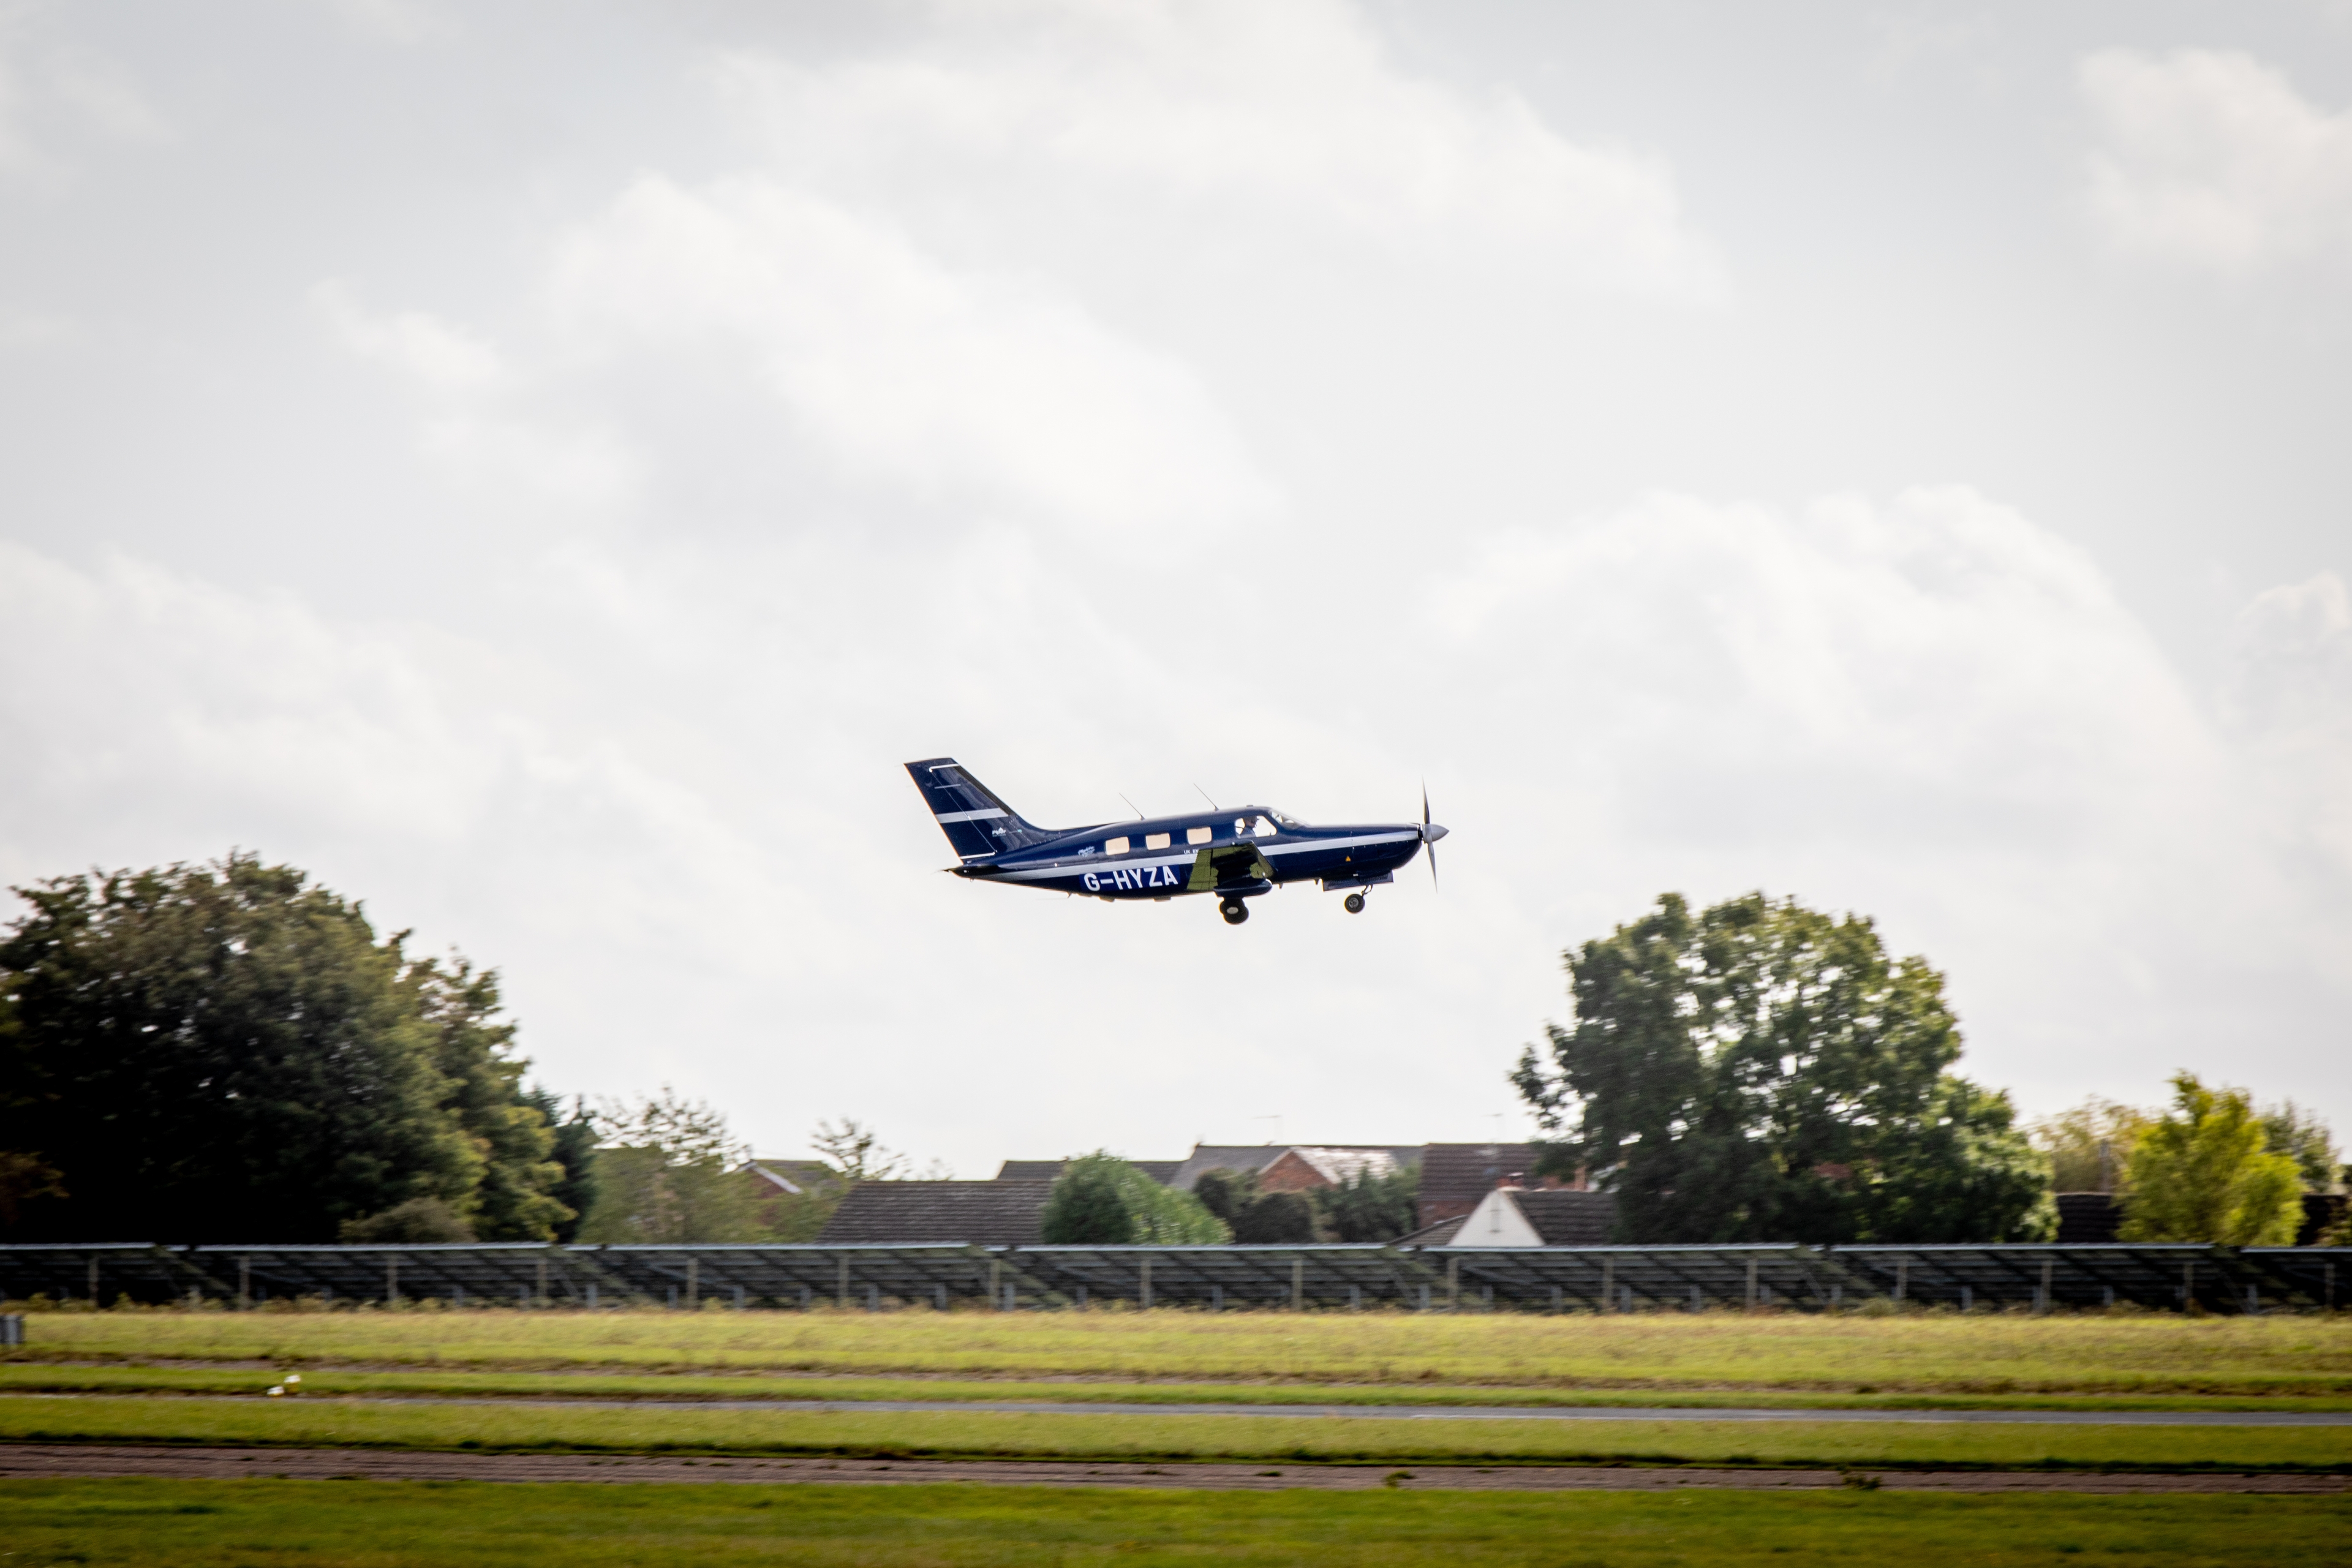 A small plane taking off or landing on a small airfield. 